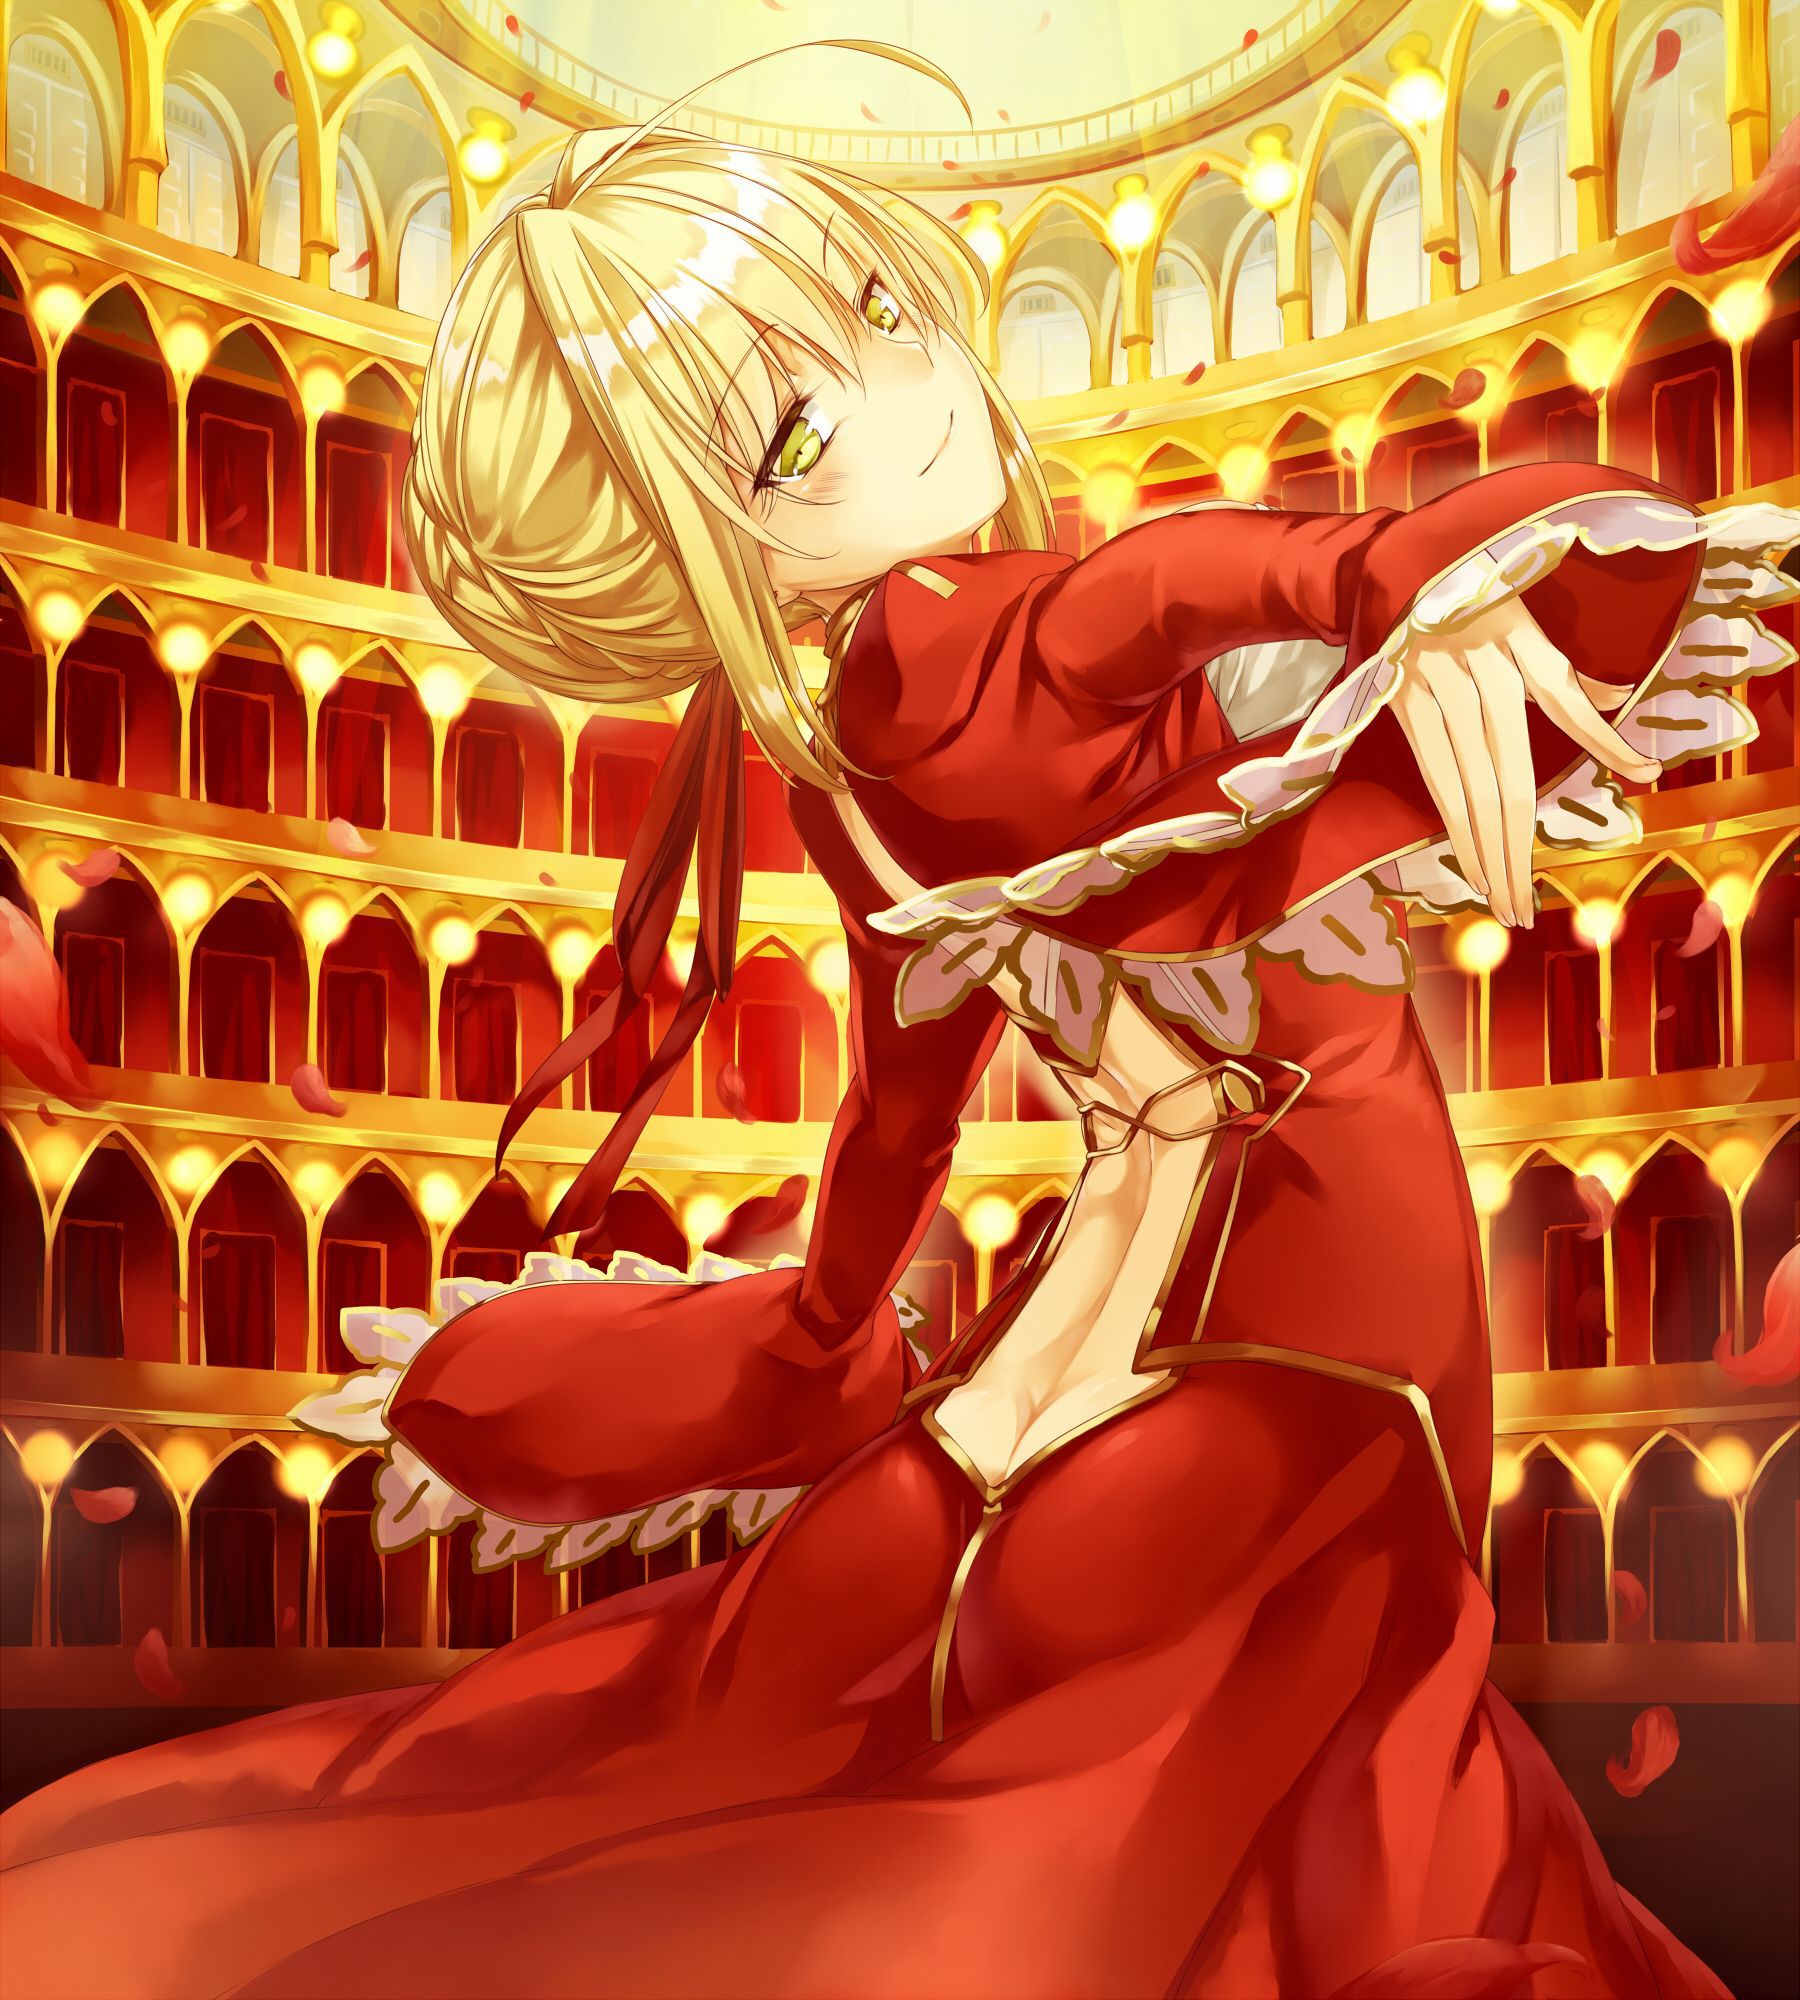 [the second] There are Fate/Grand Order(Fate/EXTRA-CCC), love of Nero Claudius, and gather up an image; No. 01 [20 pieces]! 19